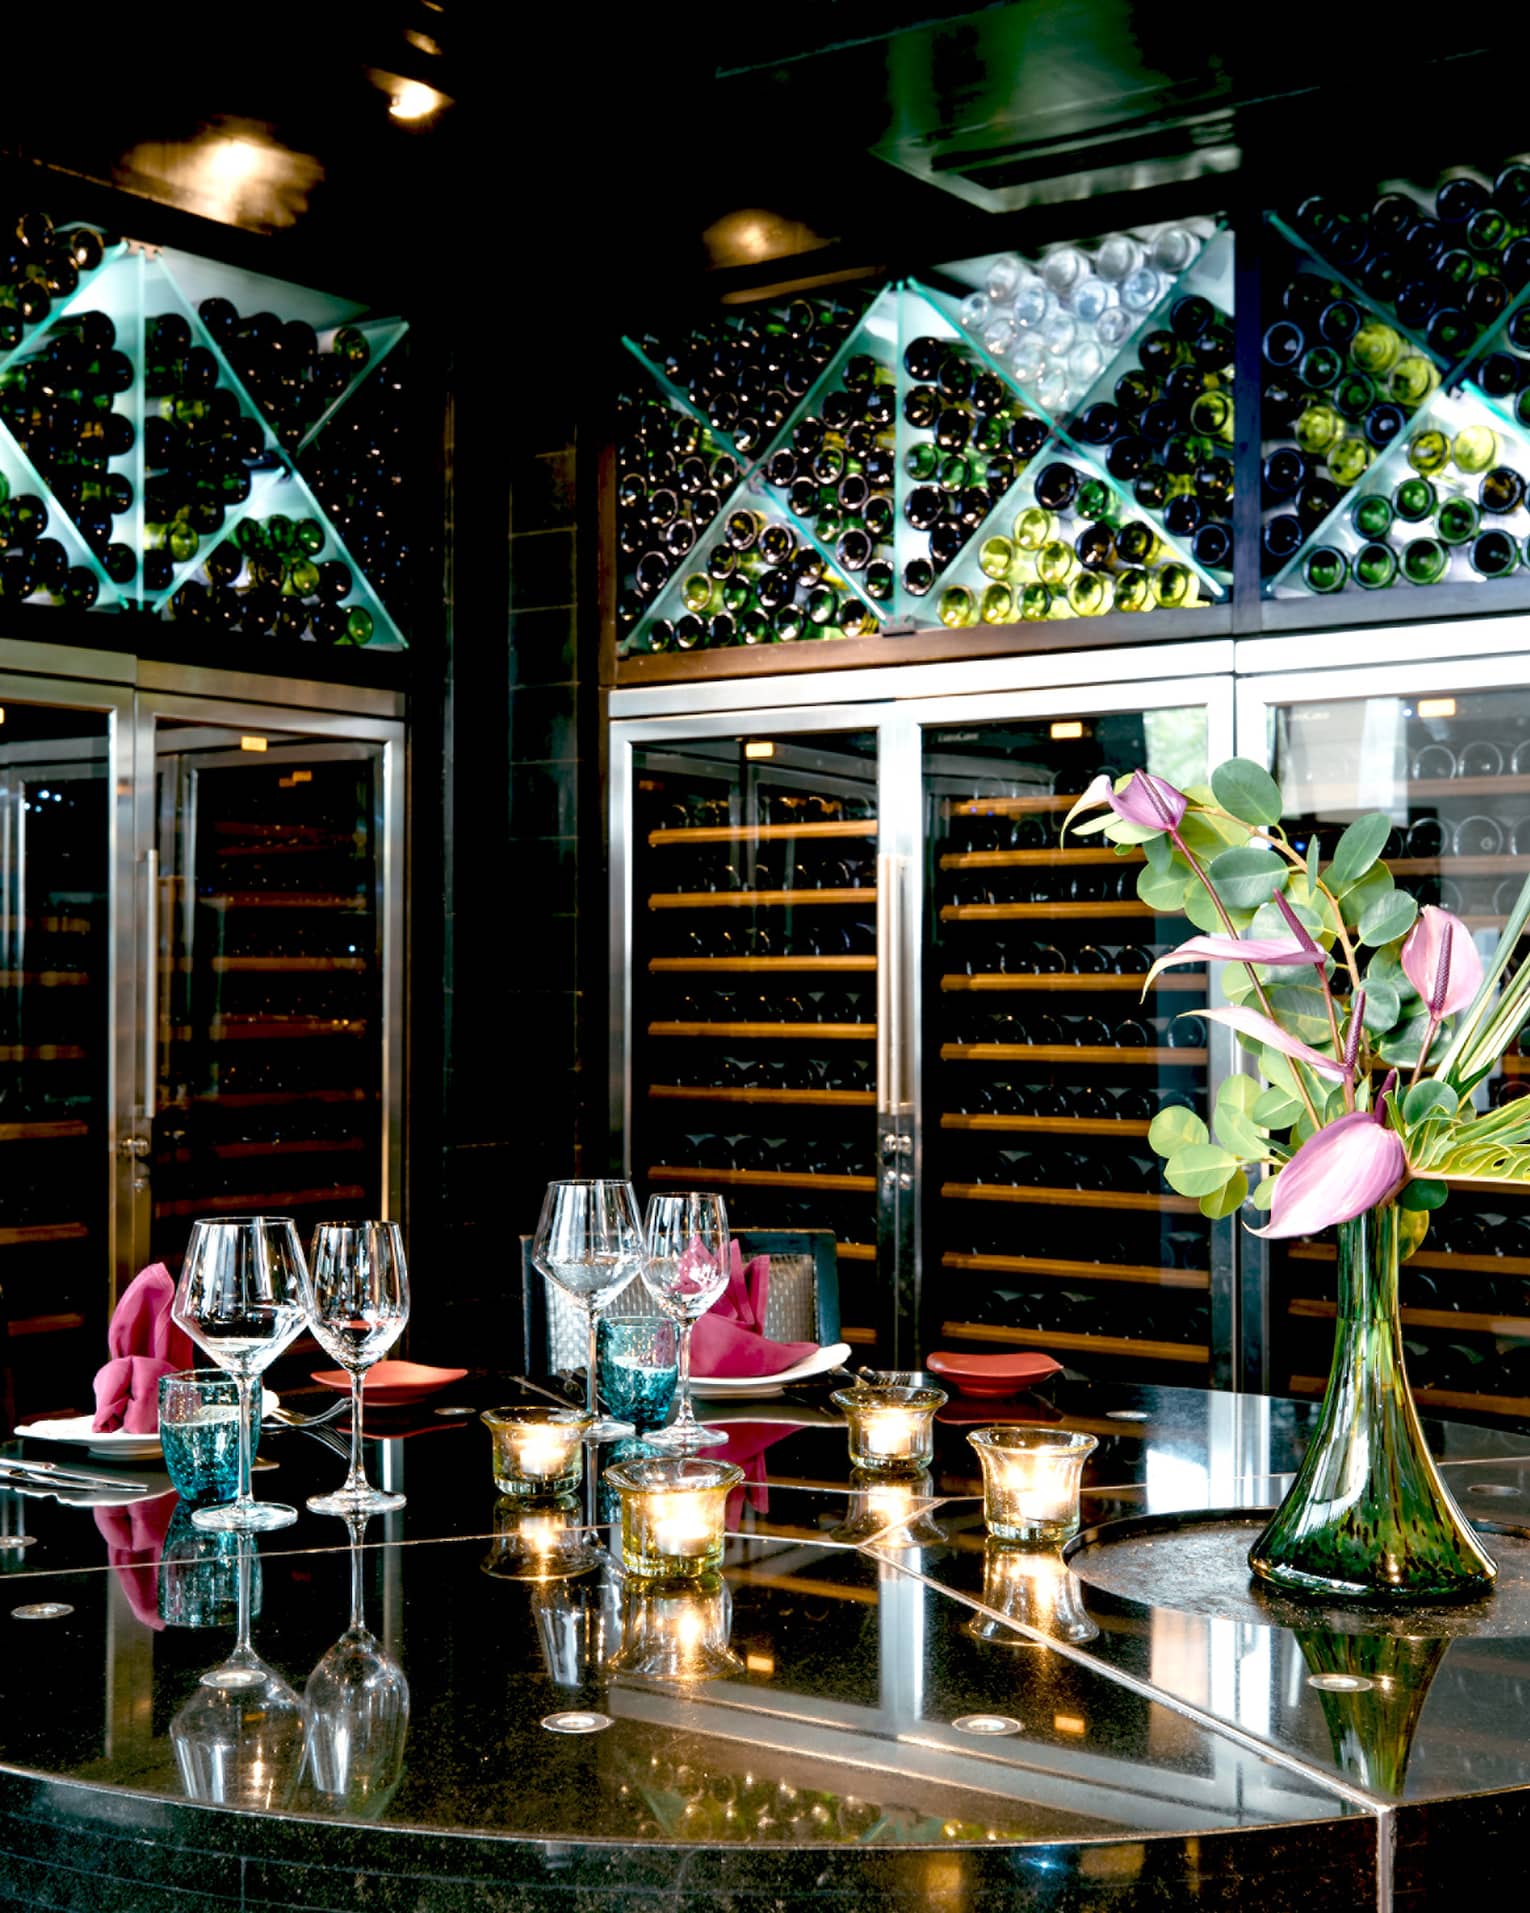 Opulent setting of goblets, candles and a tropical flower atop a mirrored table, surrounded by floor-to-ceiling wine racks.